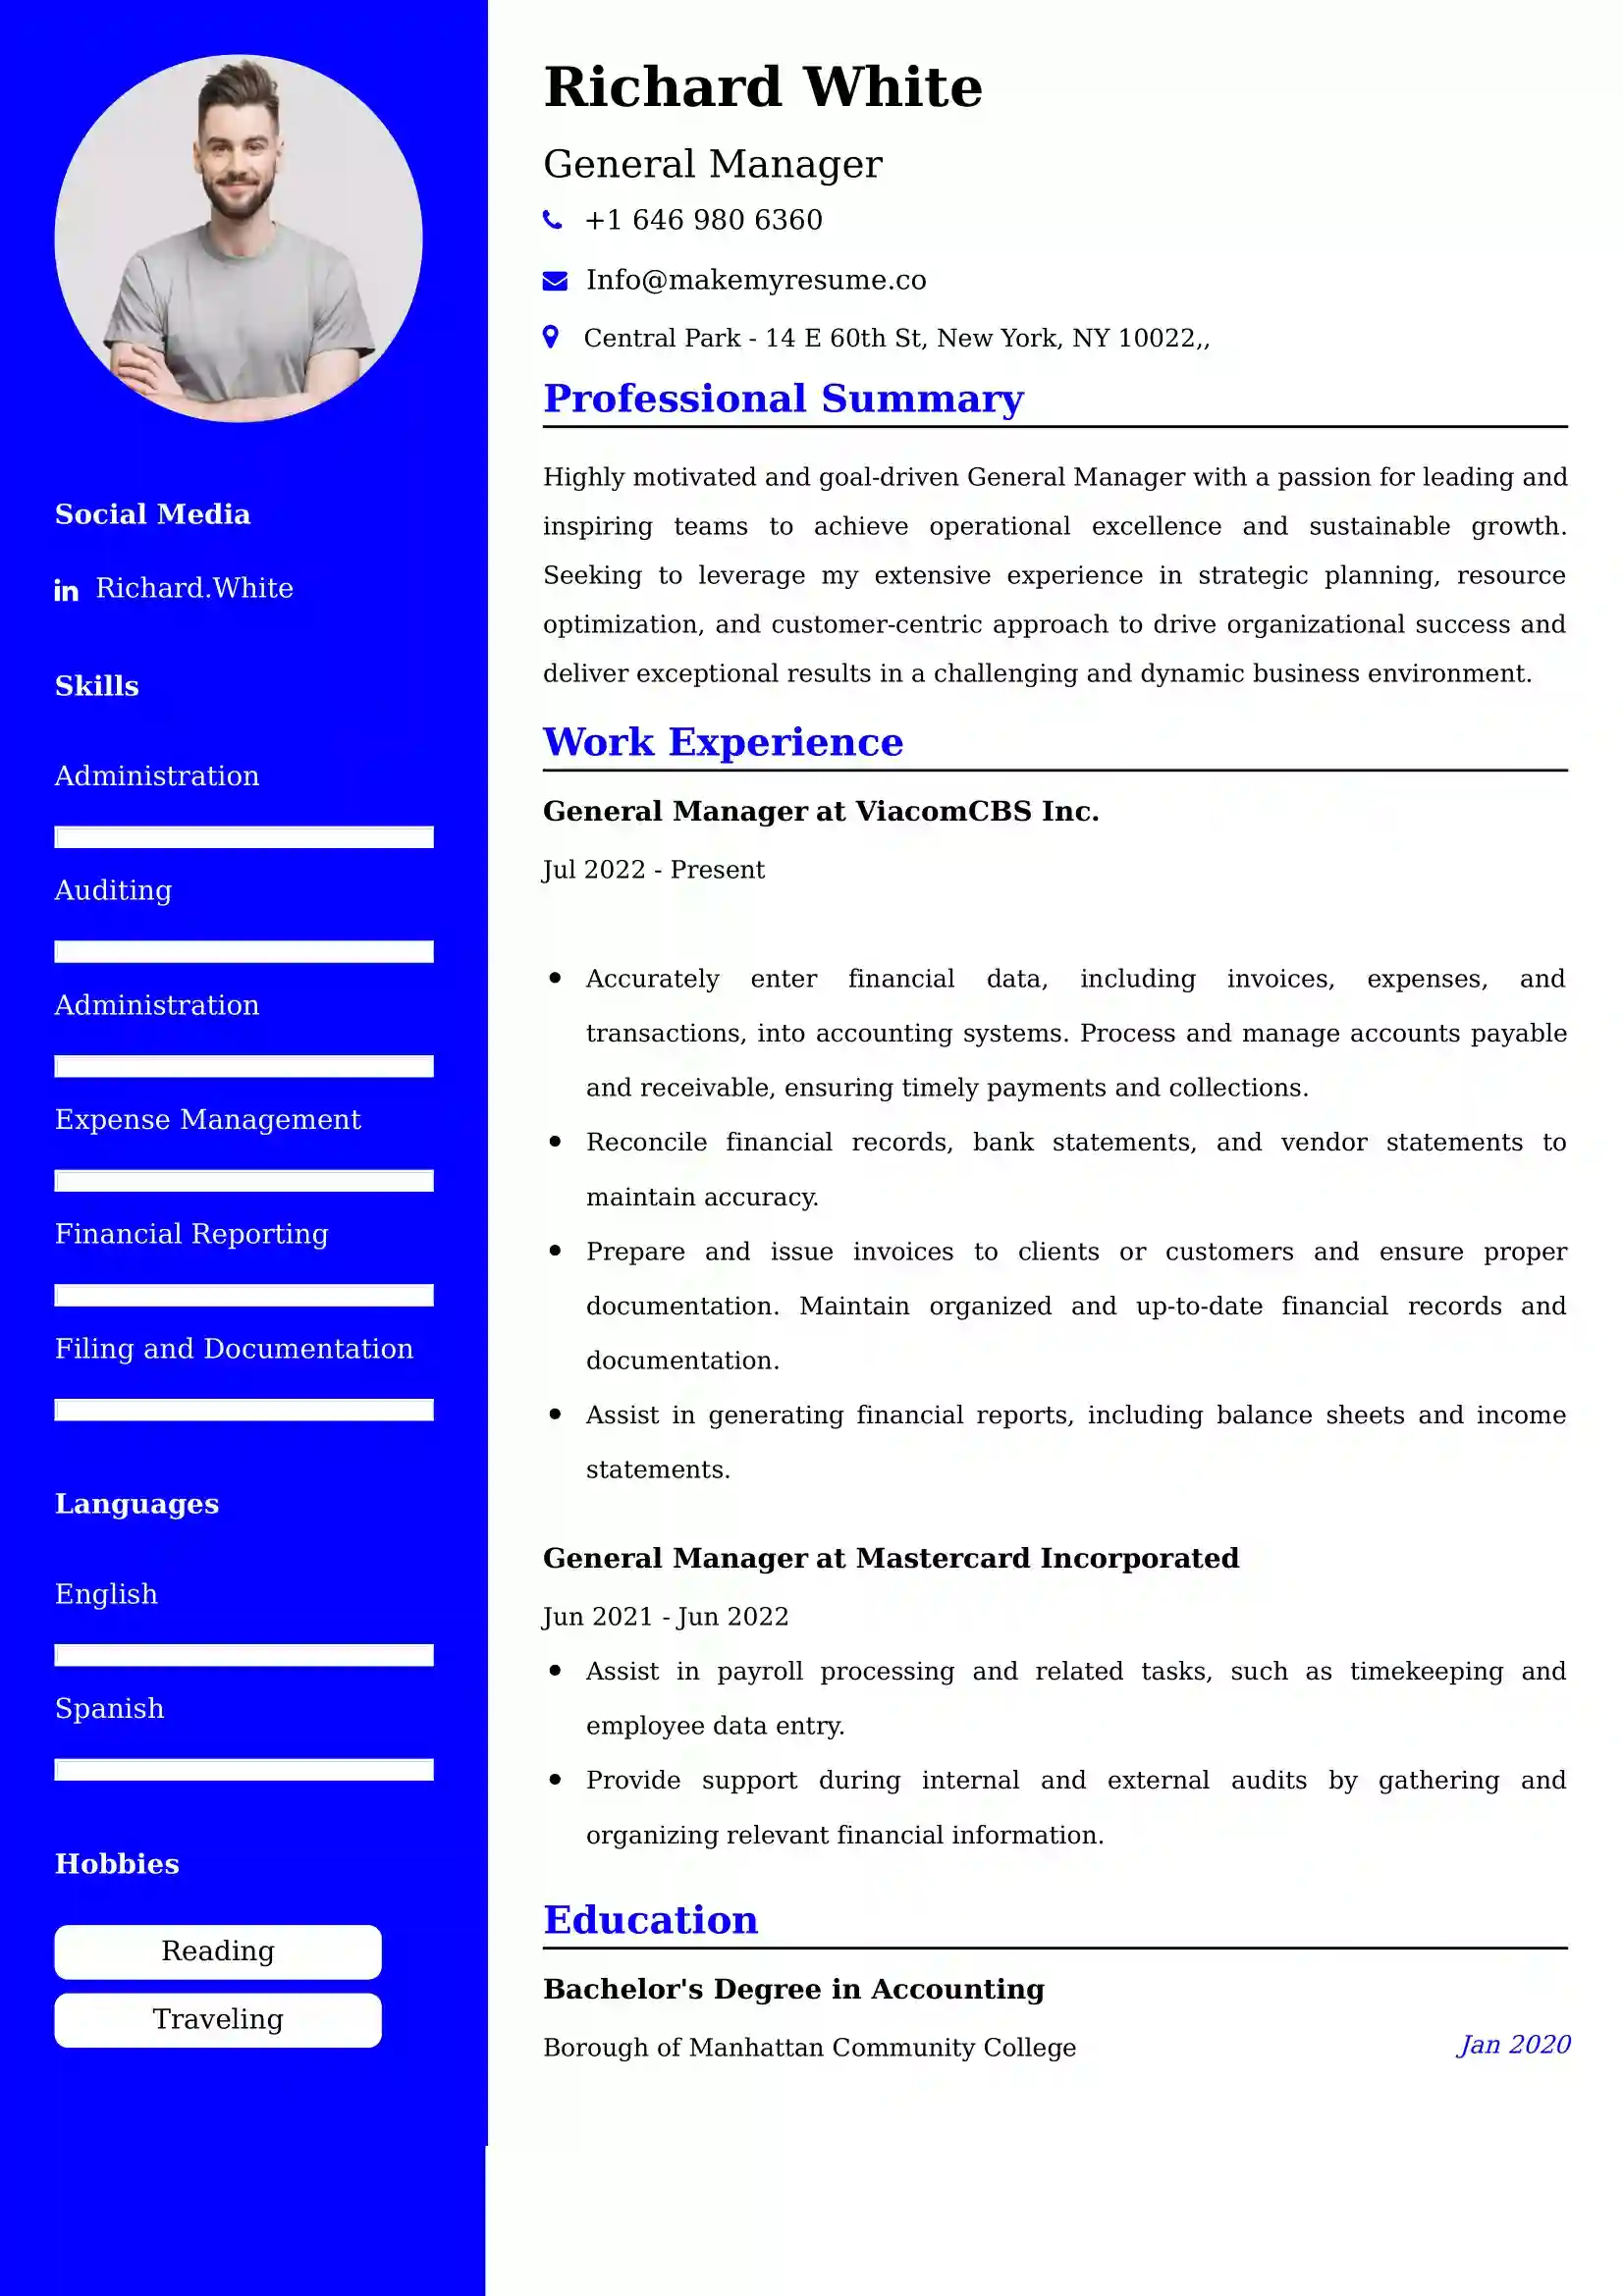 General Manager Resume Examples - Brazilian Format, Latest Template